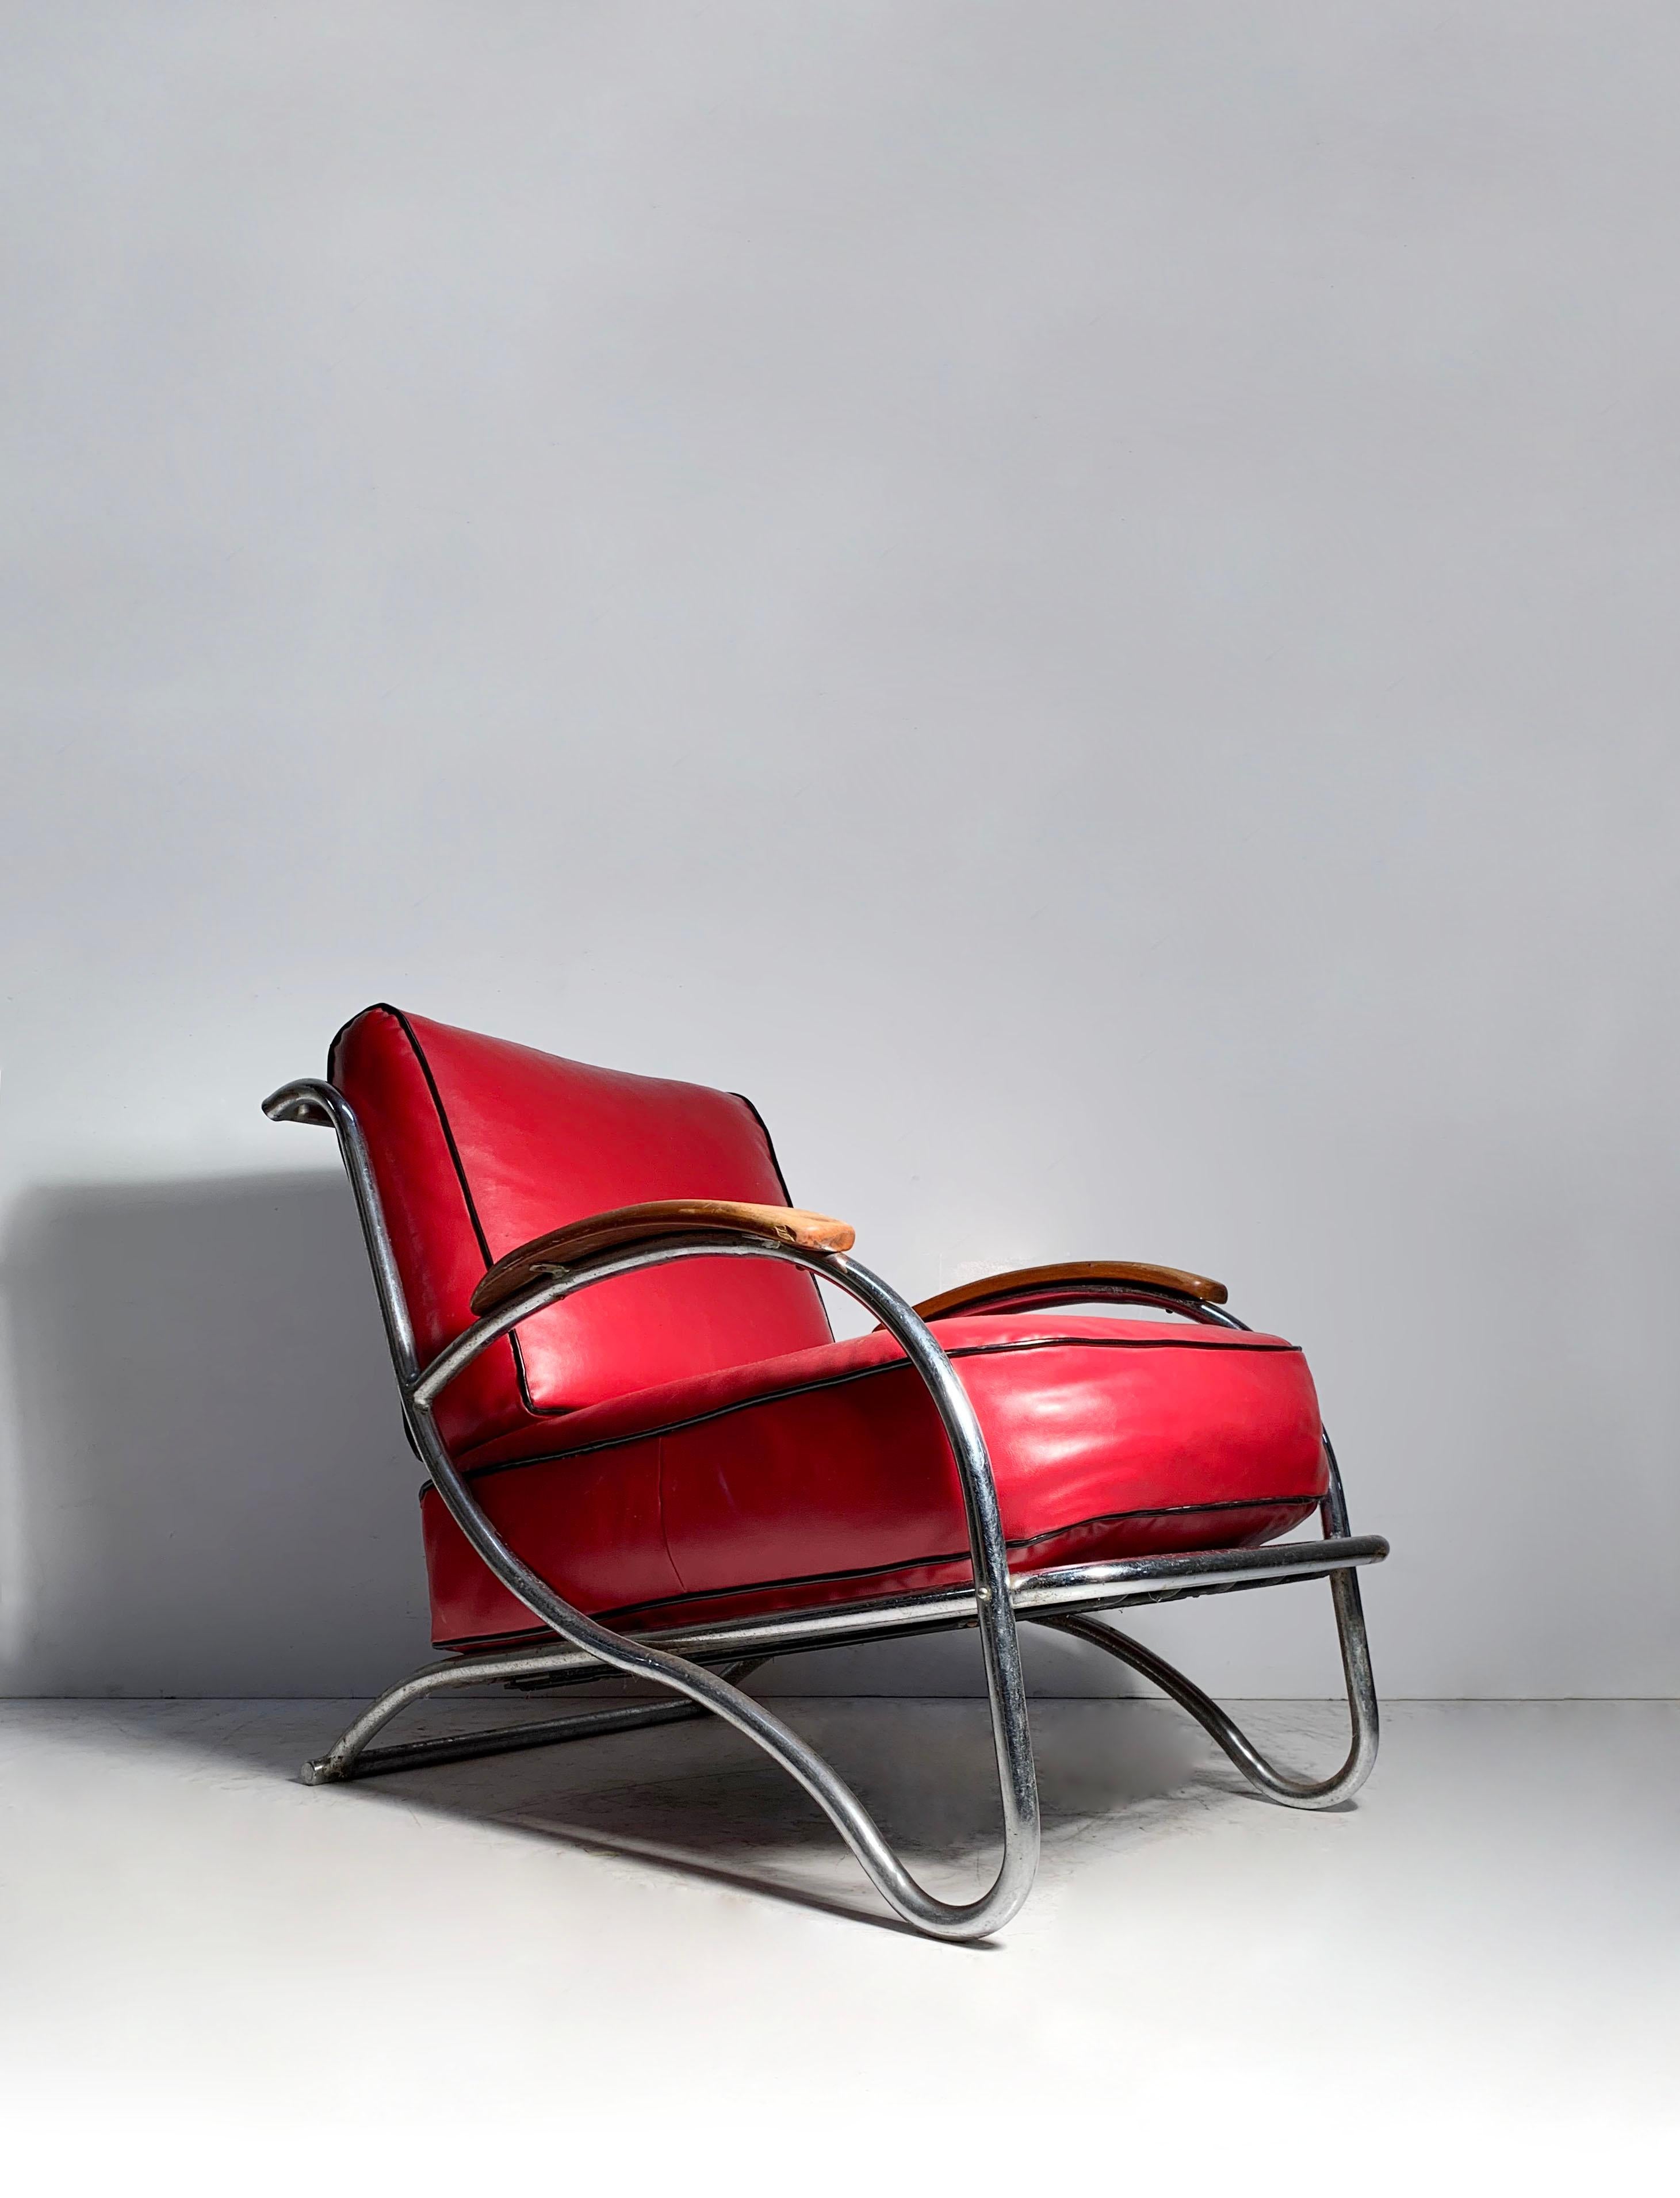 American Rare Important Art Deco Lounge Chair by Kem Weber for Lloyd For Sale